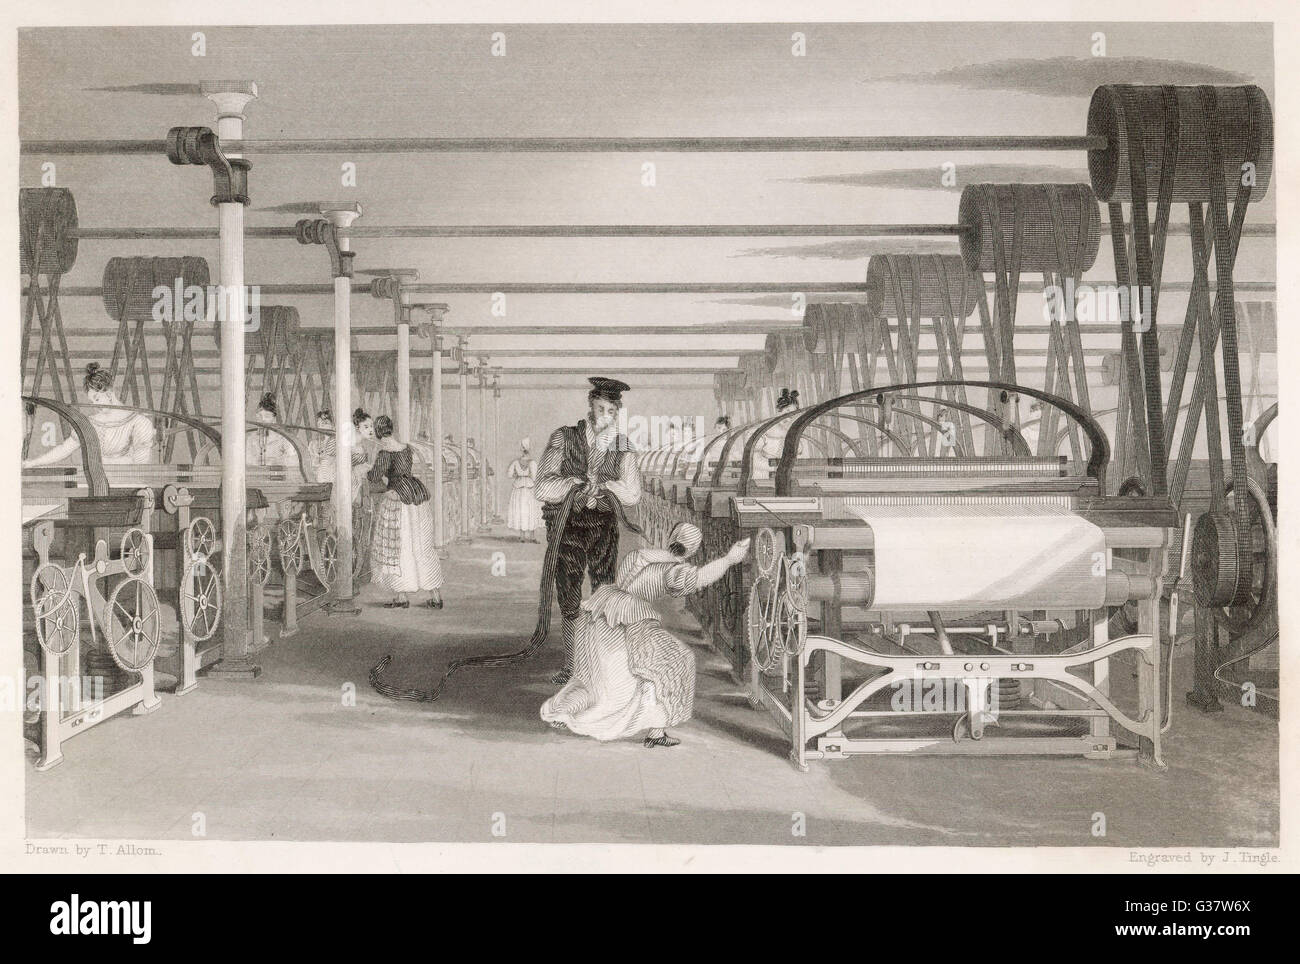 Interior of cotton mill: power loom weaving. Man and woman tend machine.       Date: 1835 Stock Photo